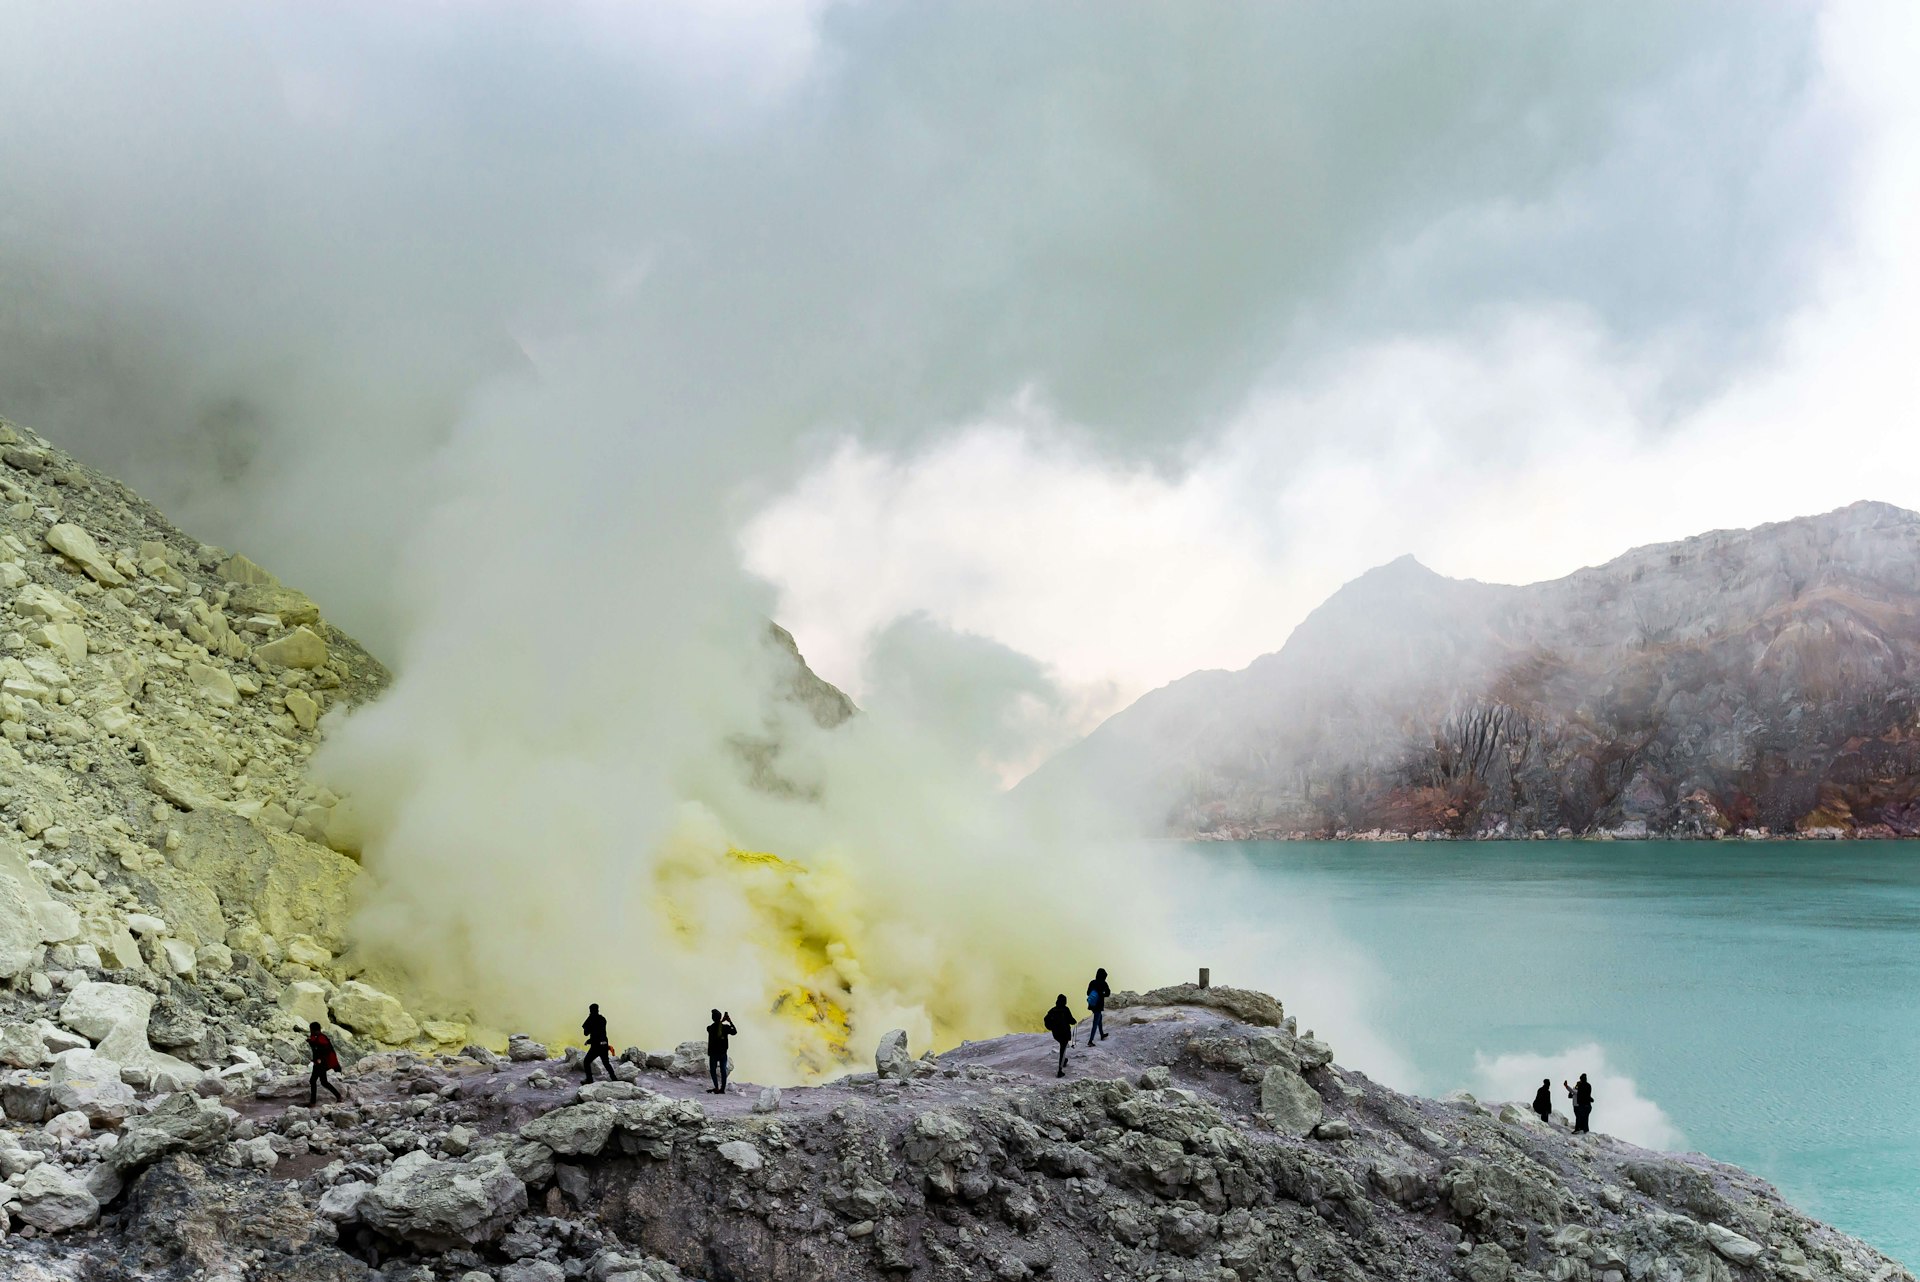 Tourists walking to see the sulfur mines and blue green lakes in Ijen crater, Indonesia